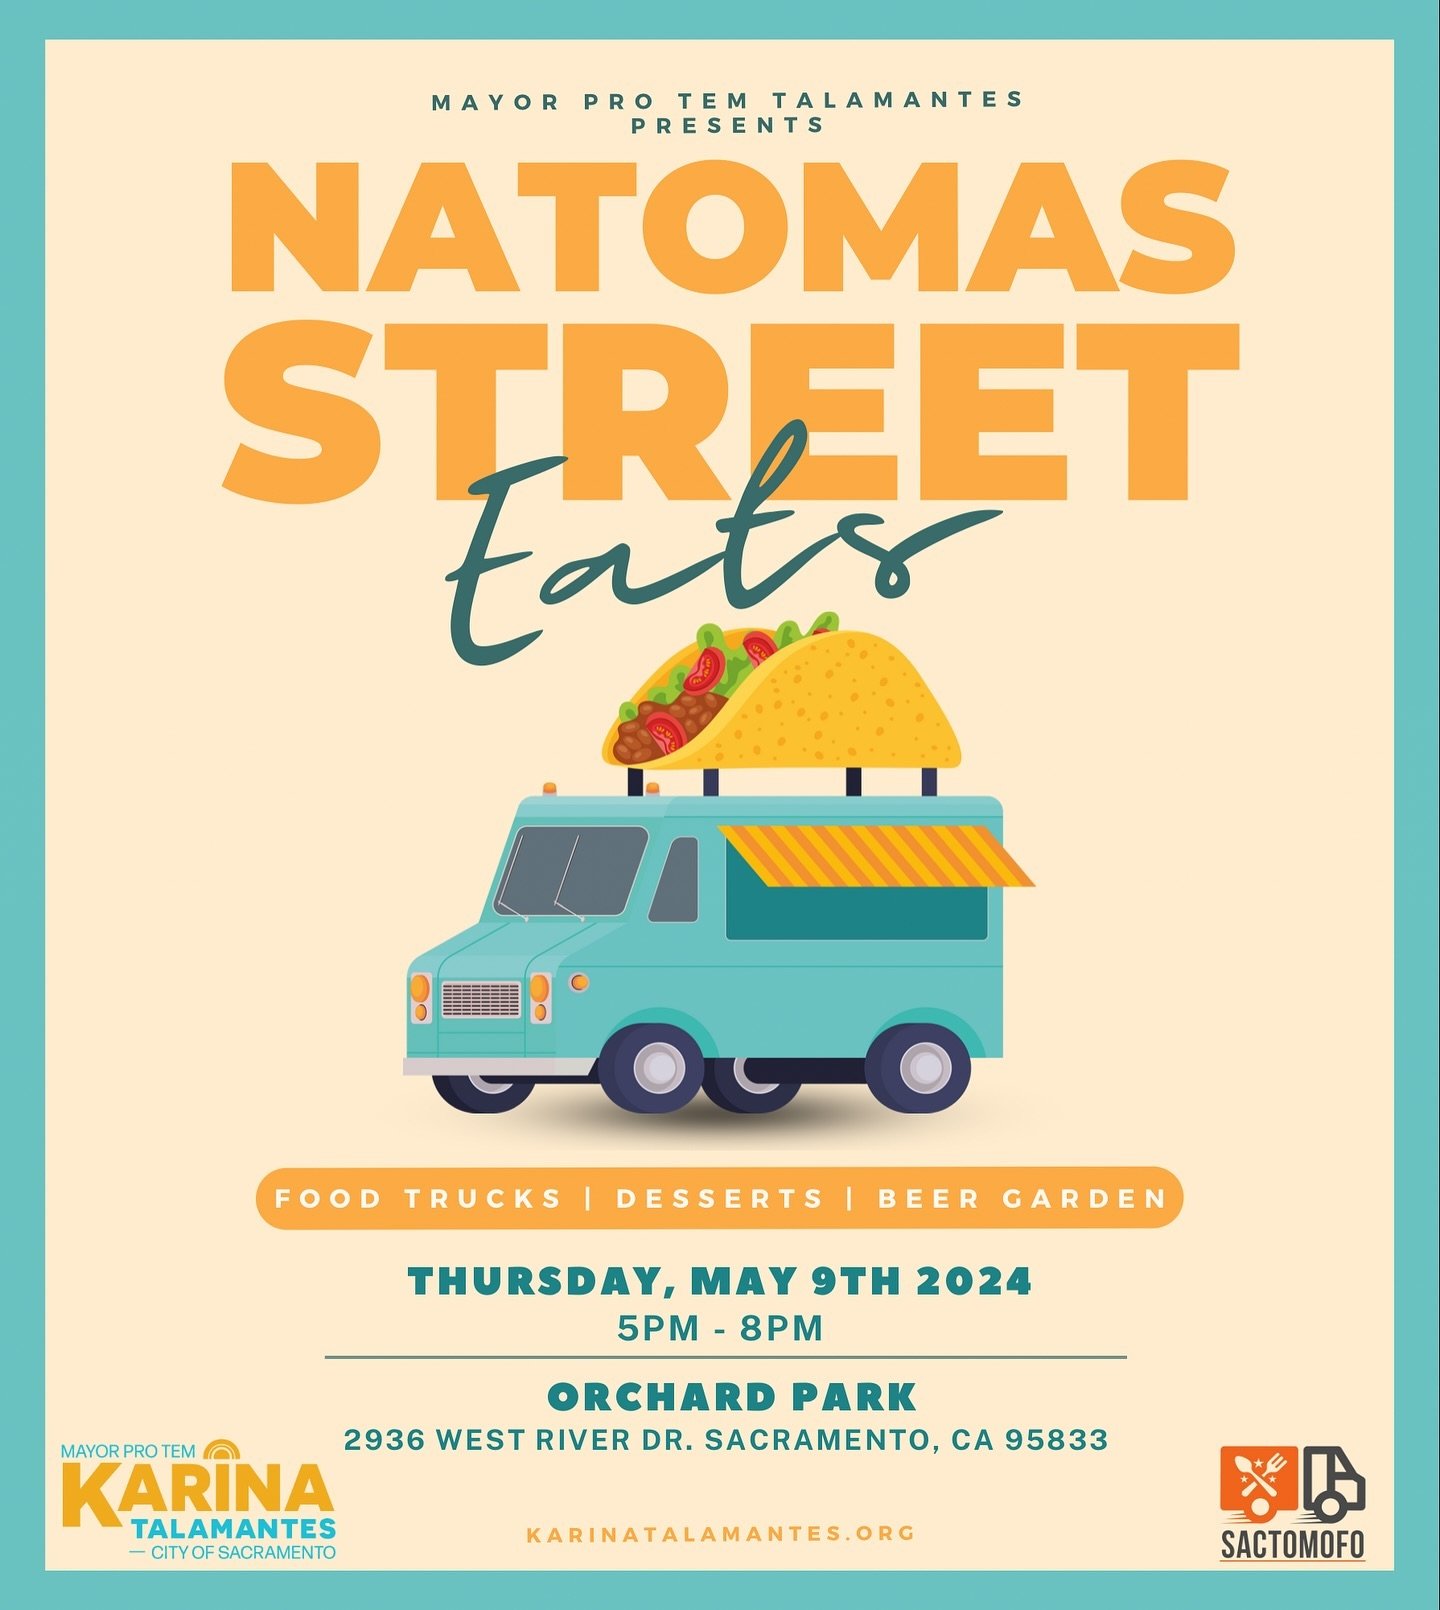 Natomas Street Eats is back starting this Thursday! 🎉

Come to Orchard Park every second Thursday of the month, May - September to enjoy food trucks, a beer garden, and fun!

This month&rsquo;s food trucks:
🌮 @ahuevofoods 
🍛 @baboyboys 
🍝 @miaski